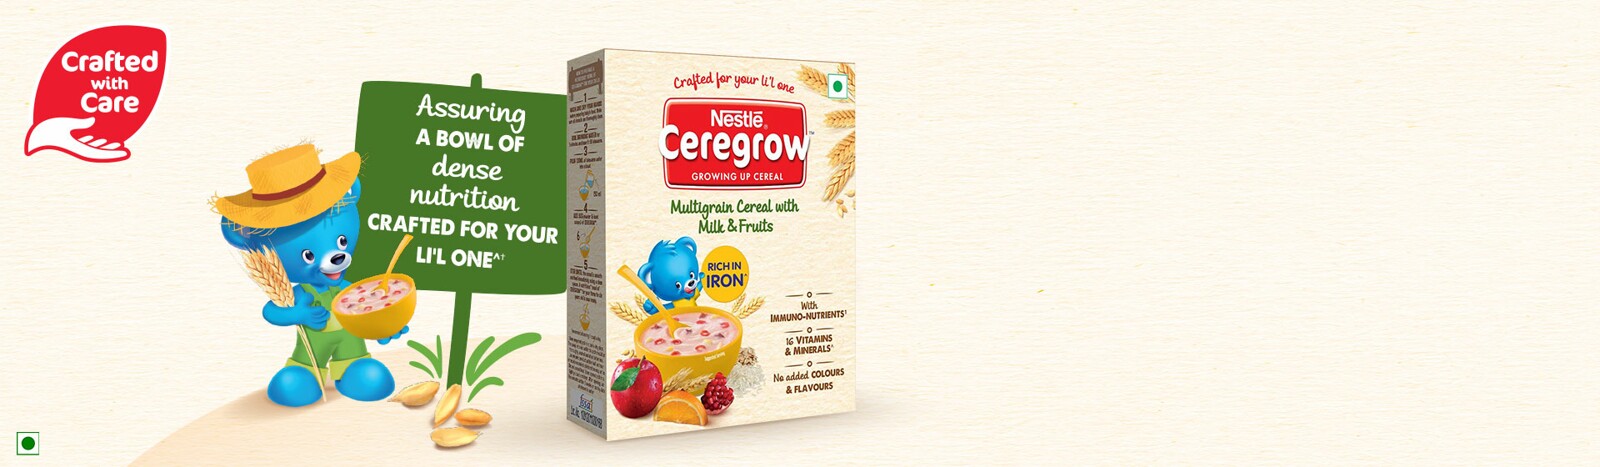 Ceregrow-Toddler-Crafted-With-Care-Banner